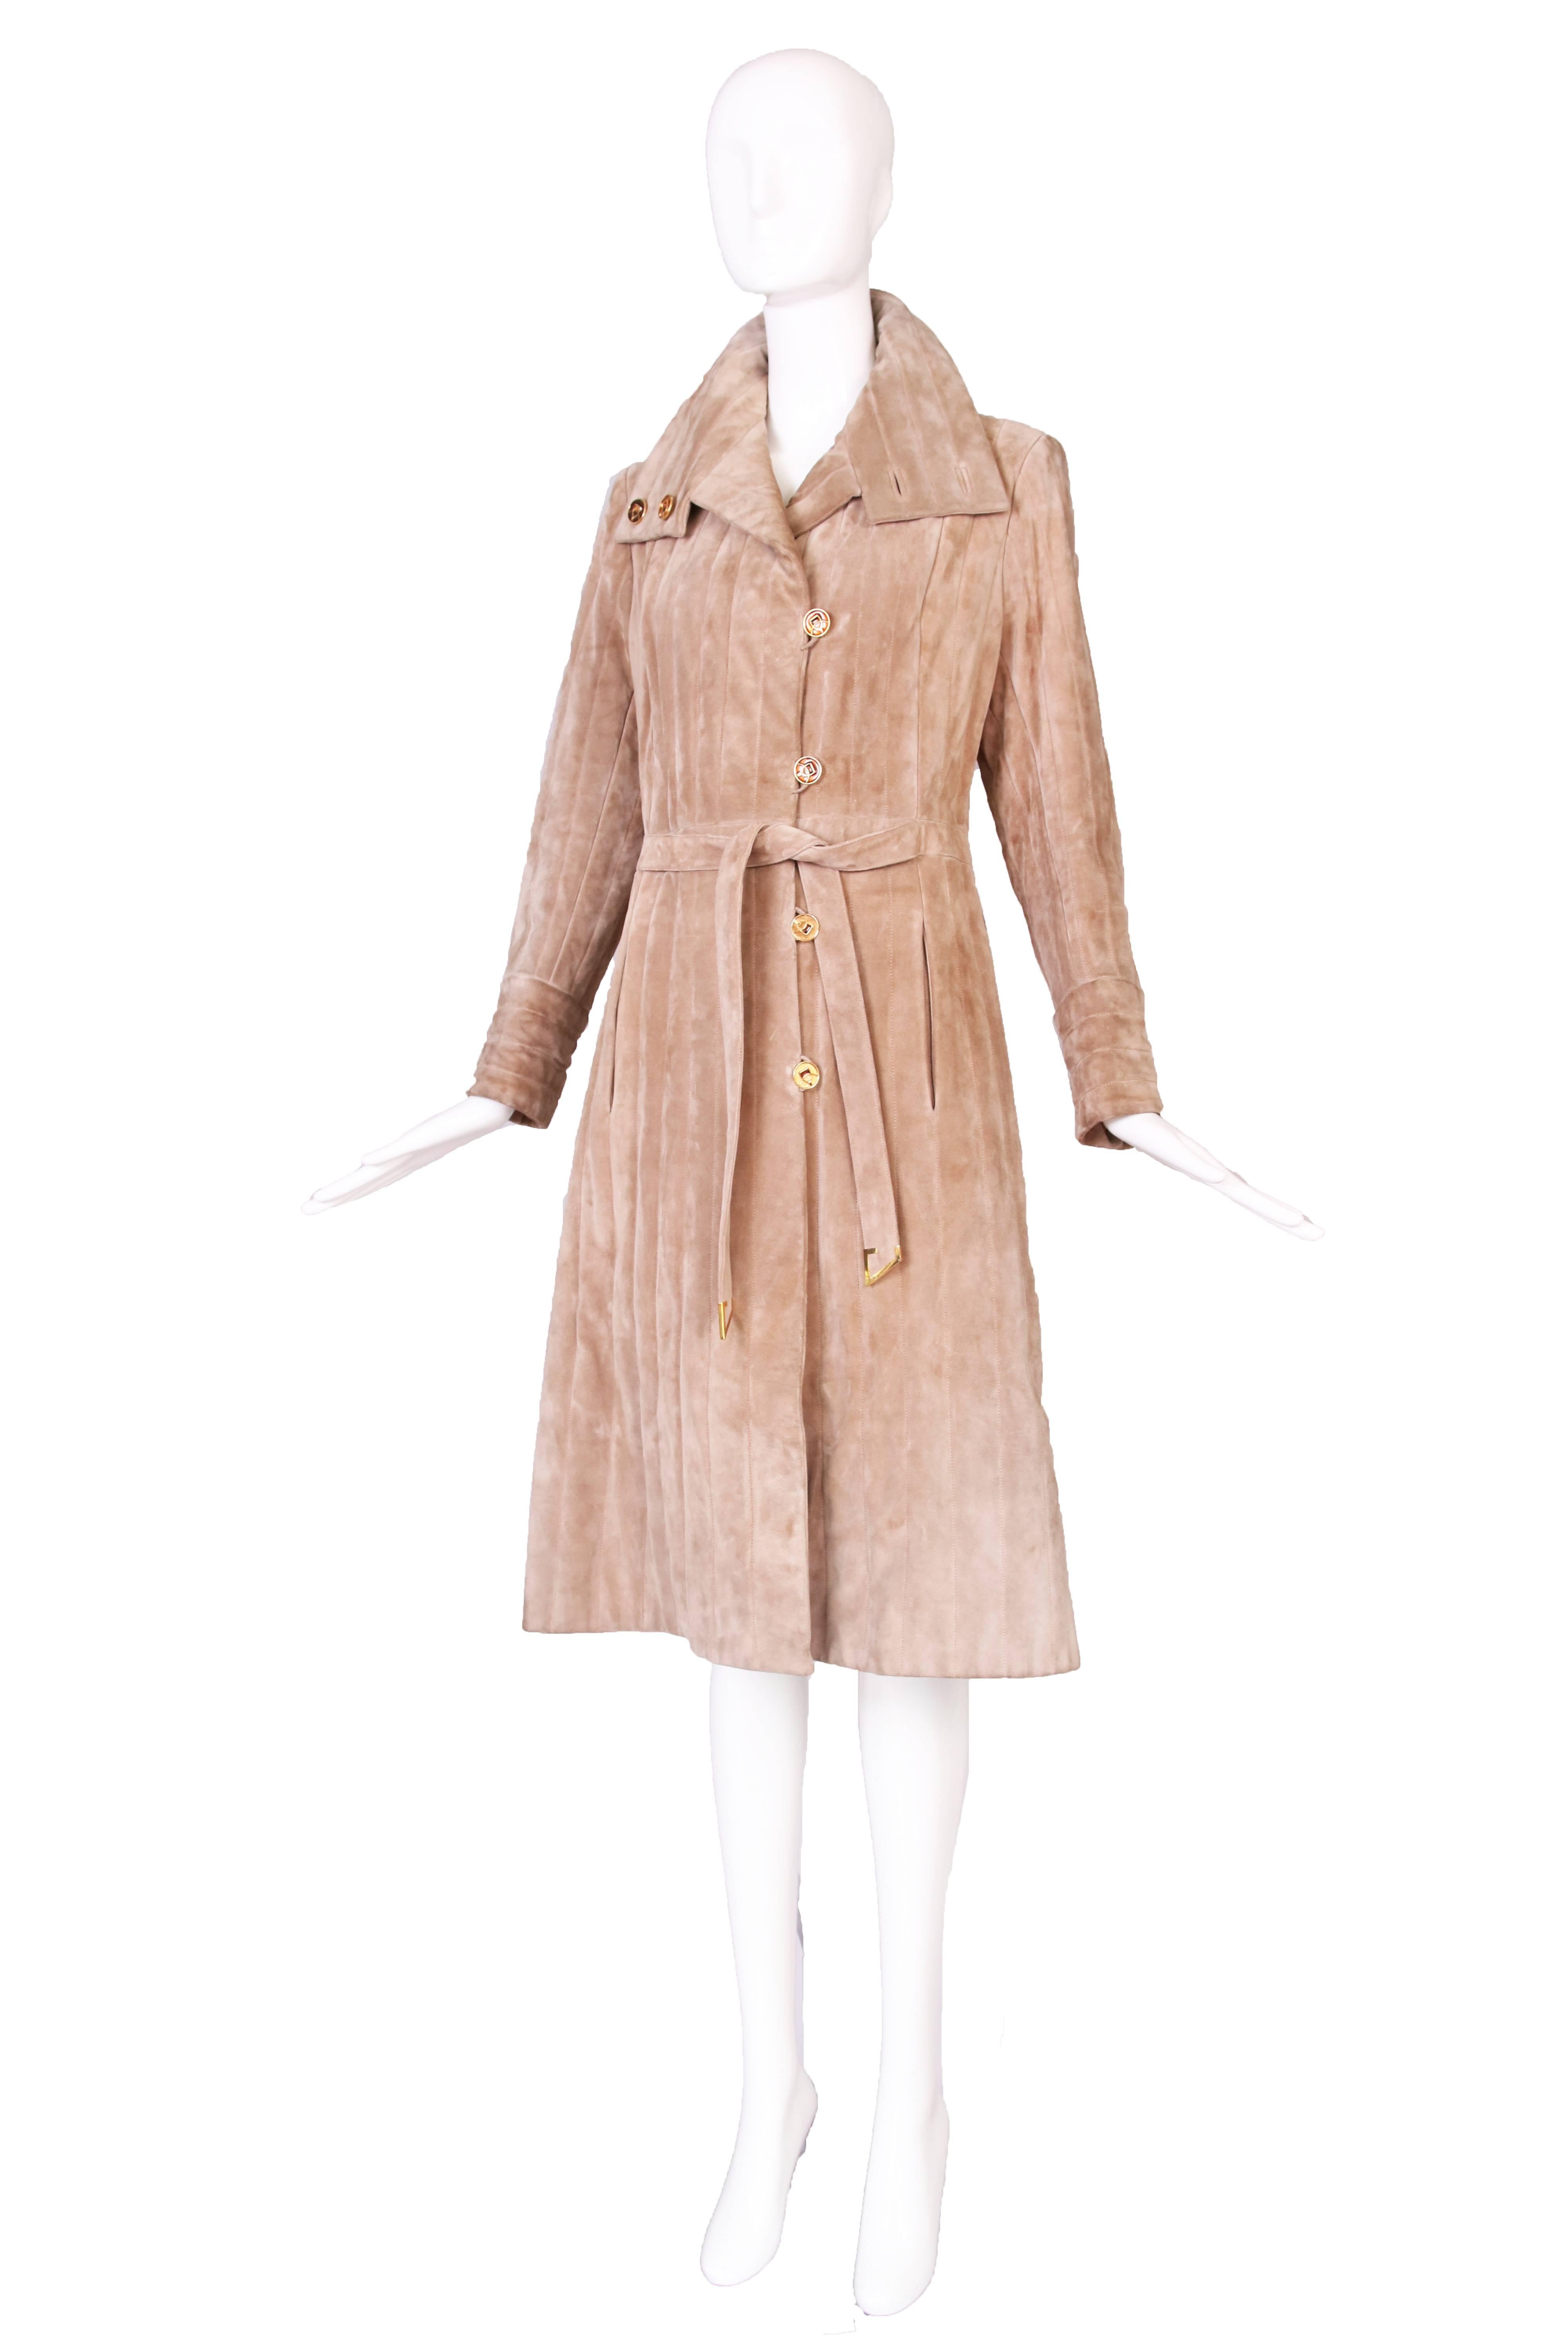 1970's Gucci quilted tan suede coat with signature glazed buttons and gold hardware in the shape of a 